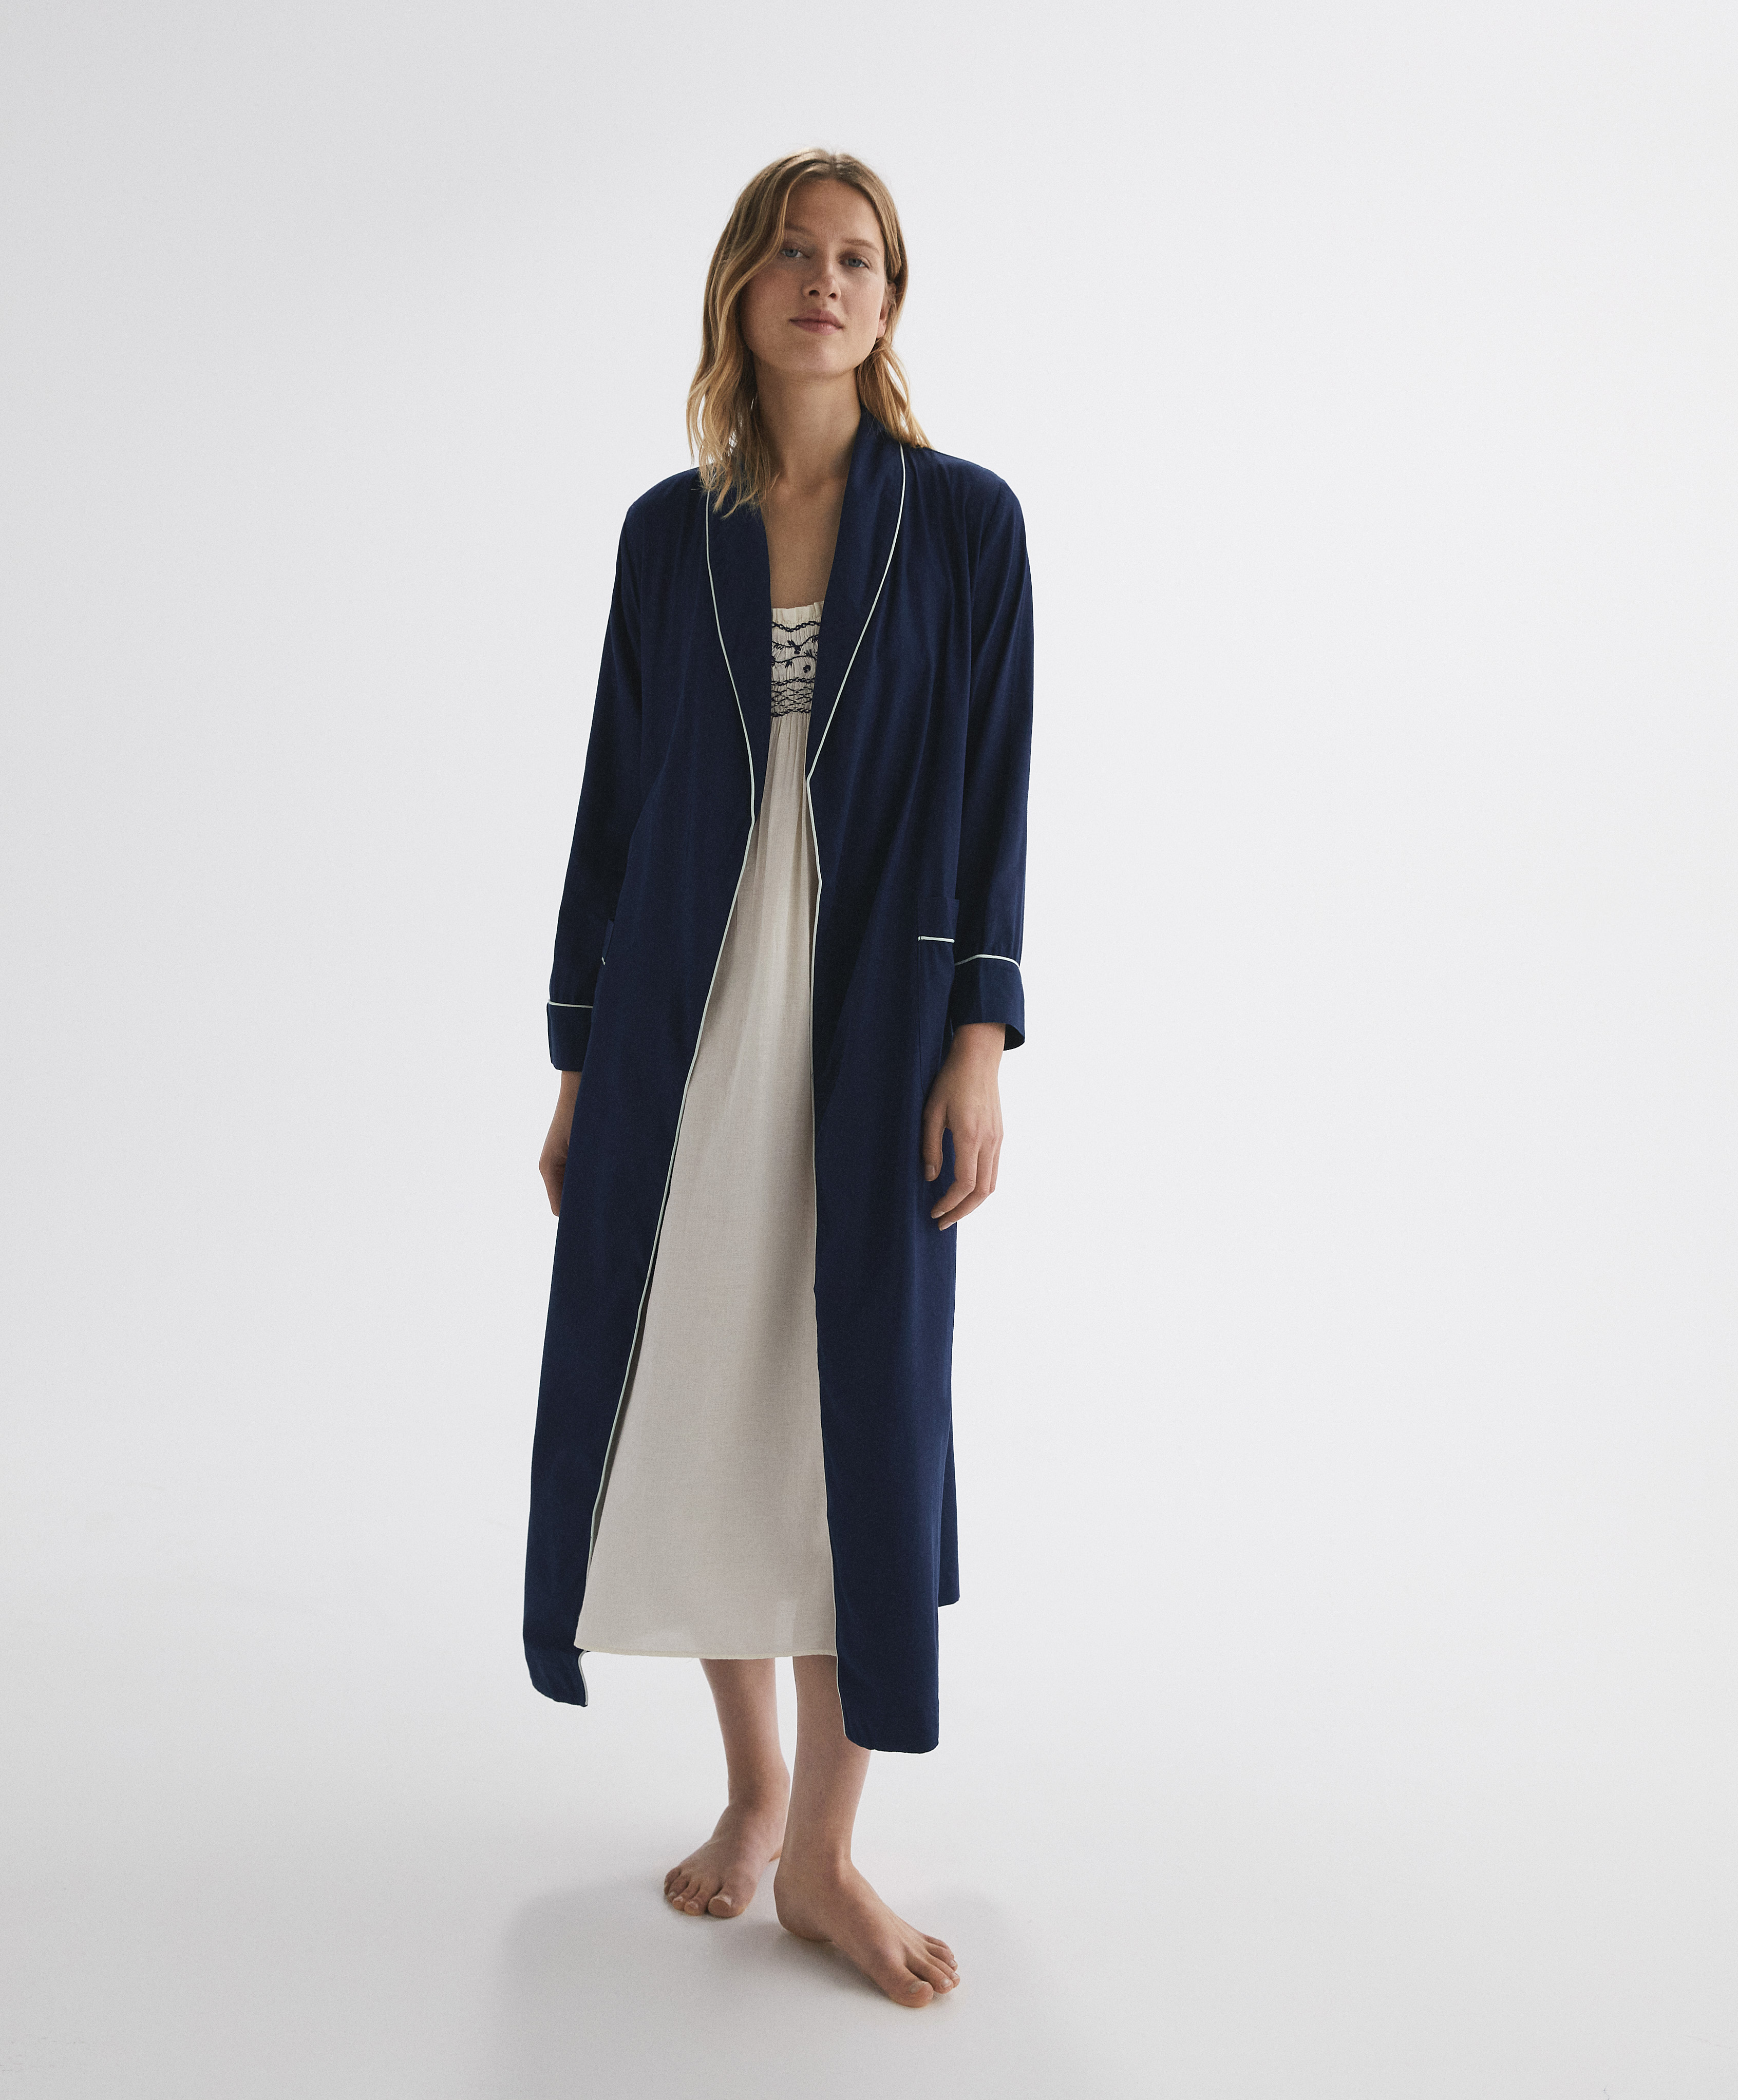 100% cotton dressing gown